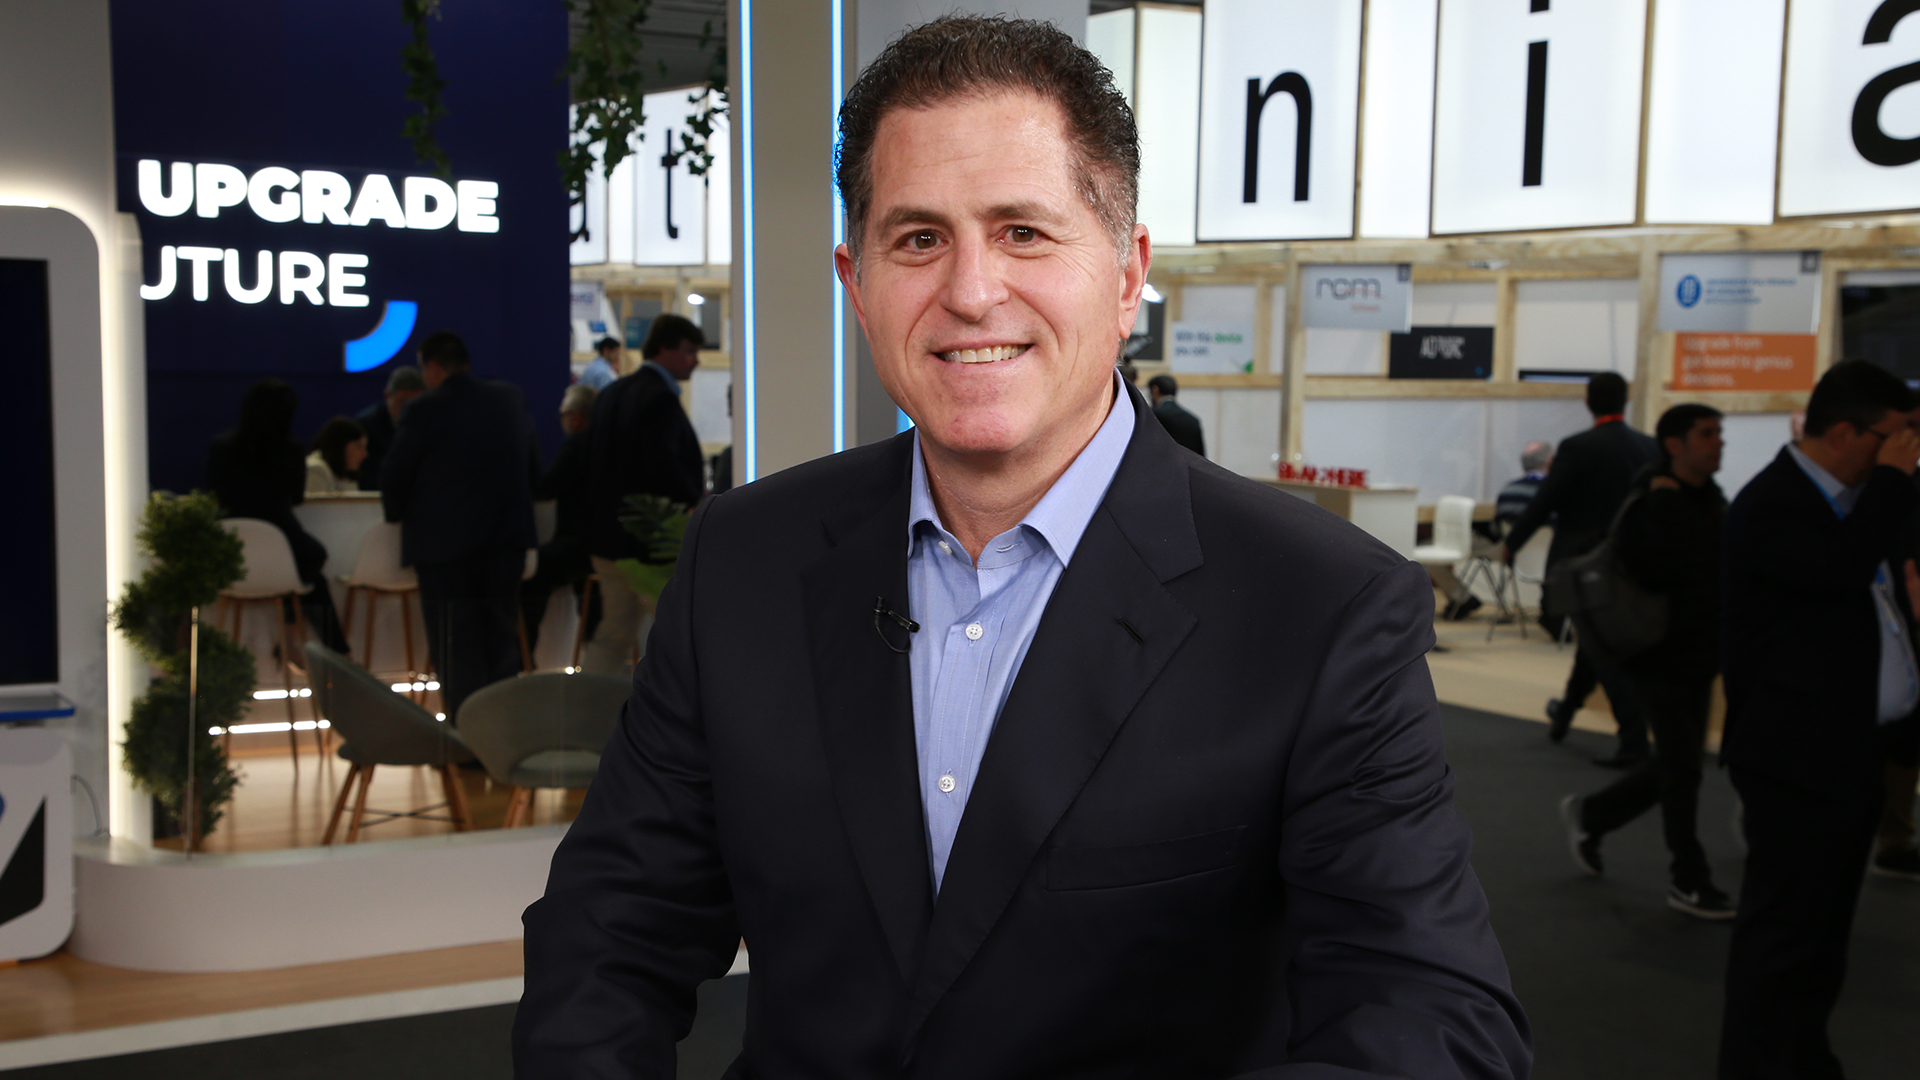 Michael Dell shares insights into the evolving landscape of technology, particularly focusing on the transformative role of AI and cloud computing.